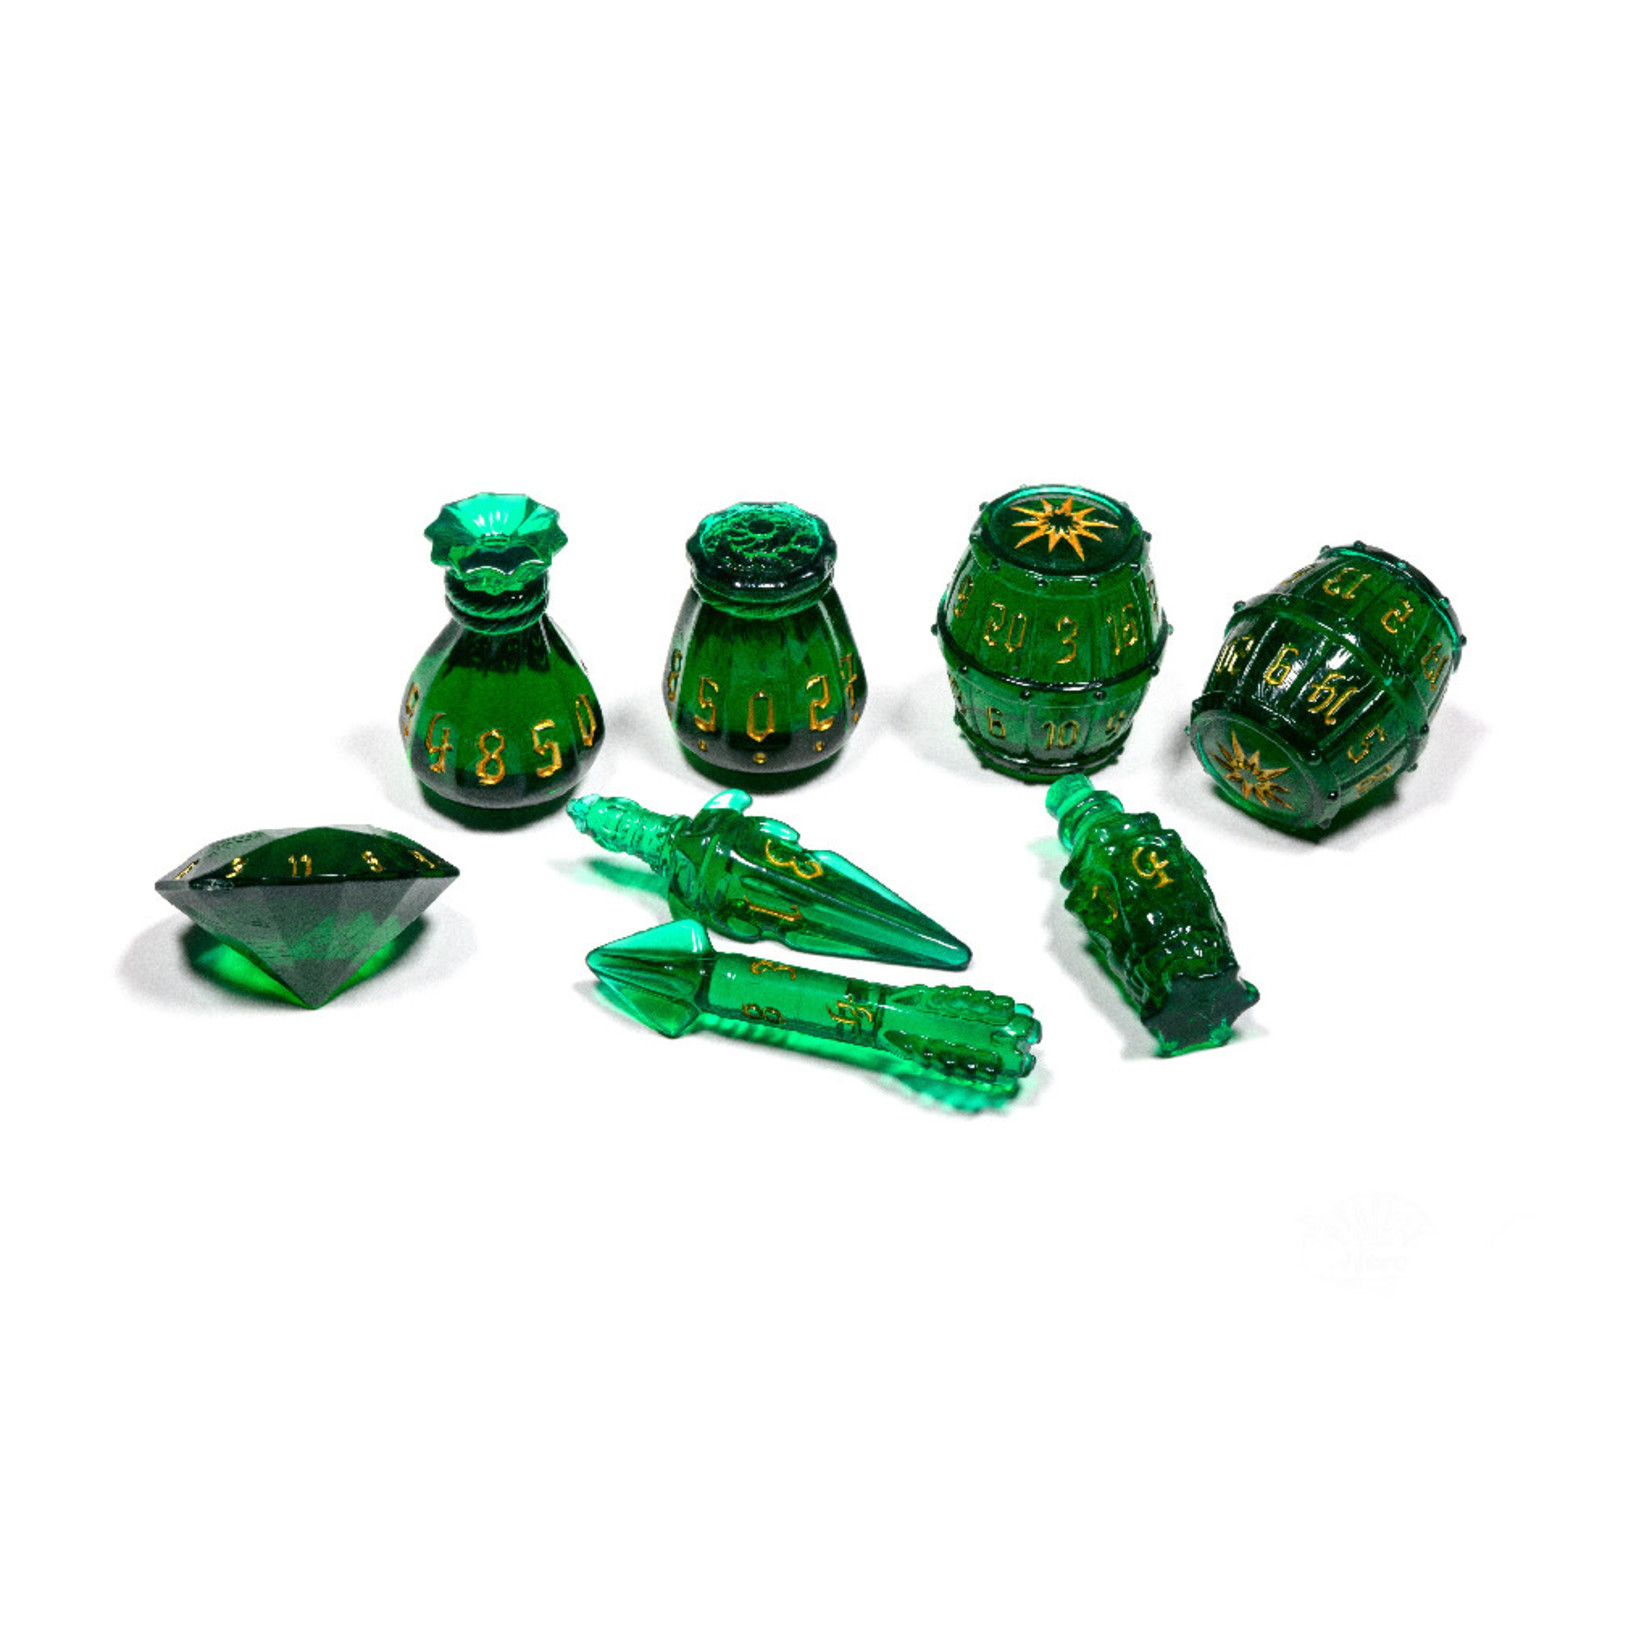 Tabletop Tycoon PolyHero 8 Dice Set: The Rogue: Emerald Emissary